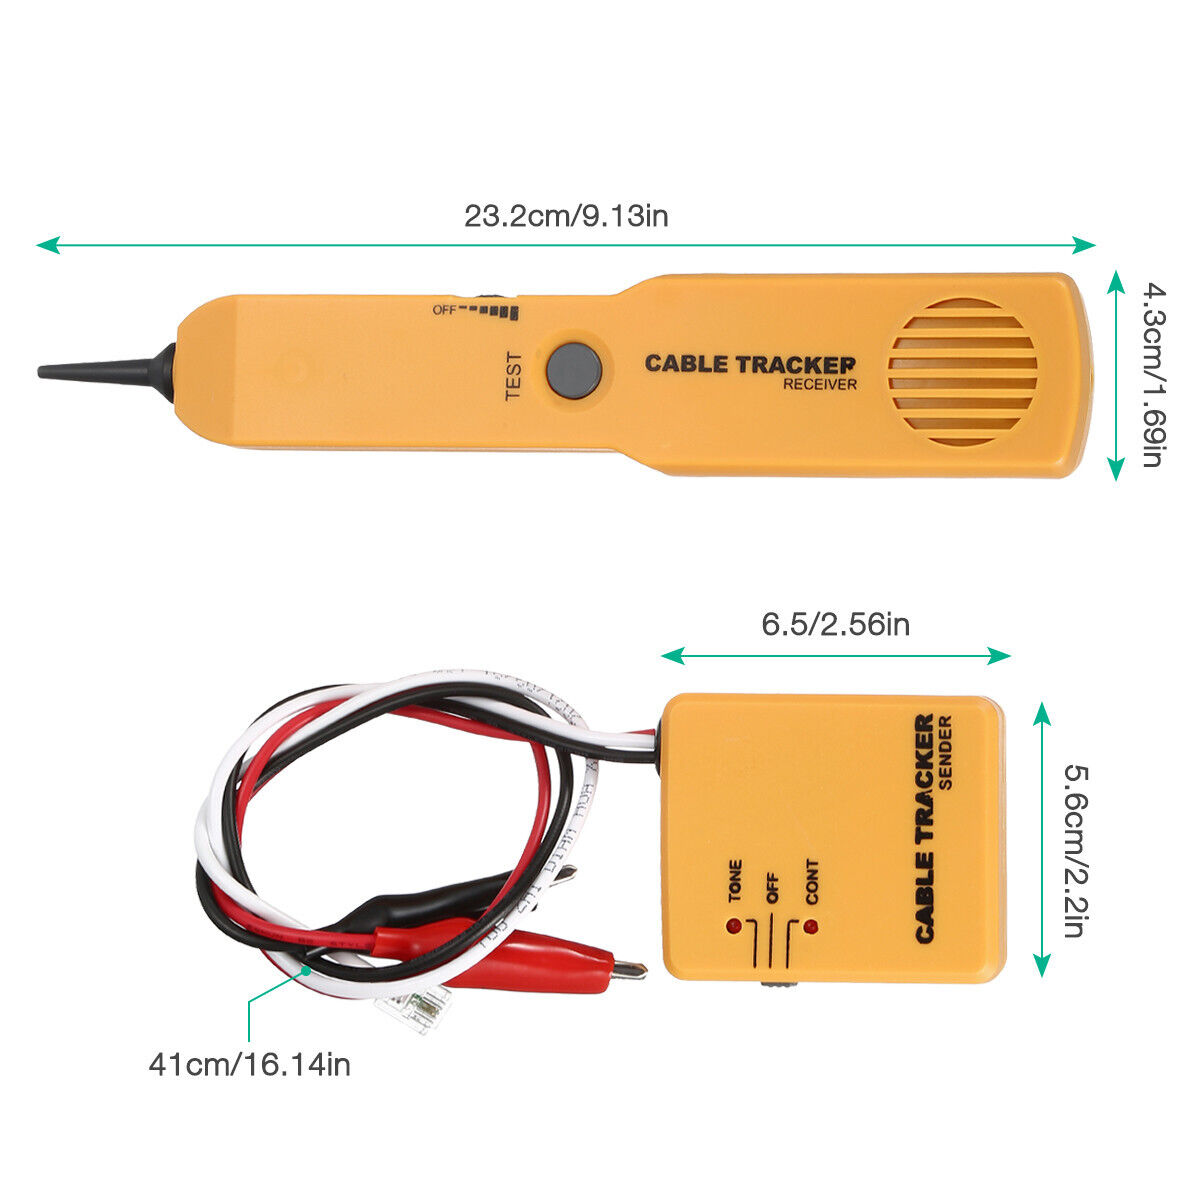 Network RJ11 Line Finder Cable Tracker Tester Toner Electric Wire Tracer Pouch Ombar Network RJ11 Tracker Tester - фотография #10